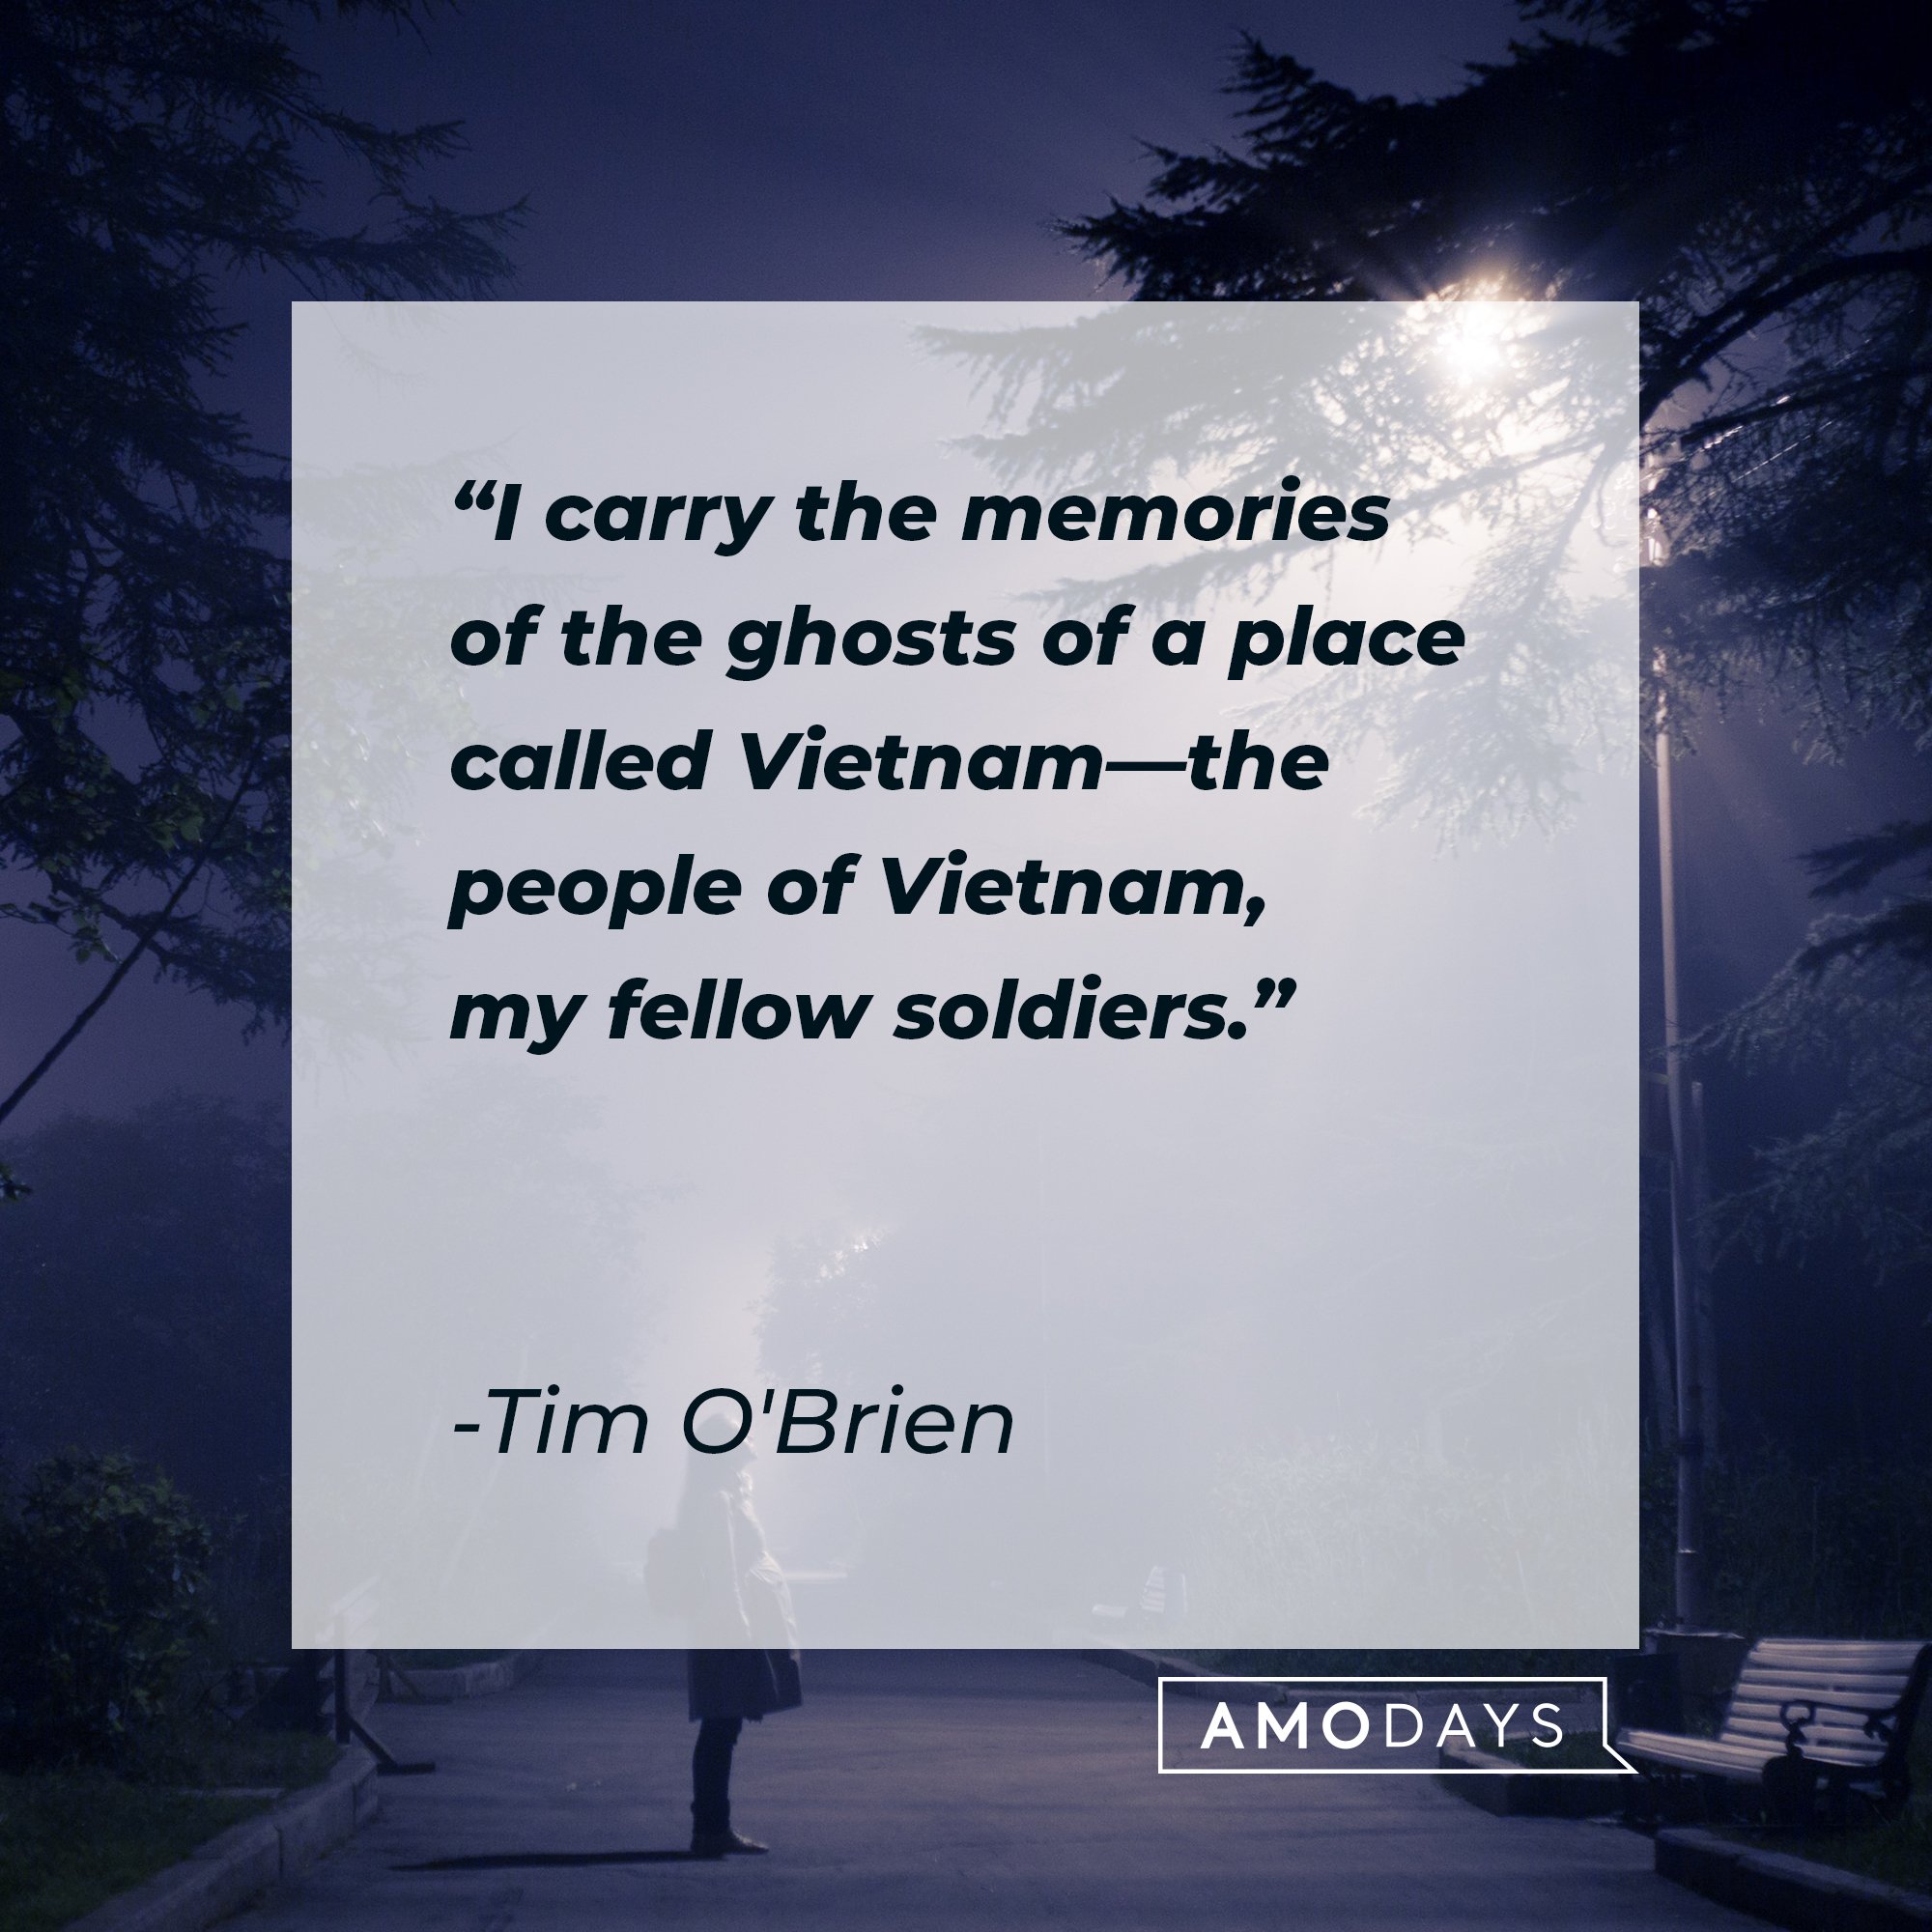 Tim O'Brien’s quote: "I carry the memories of the ghosts of a place called Vietnam—the people of Vietnam, my fellow soldiers." | Image: AmoDays